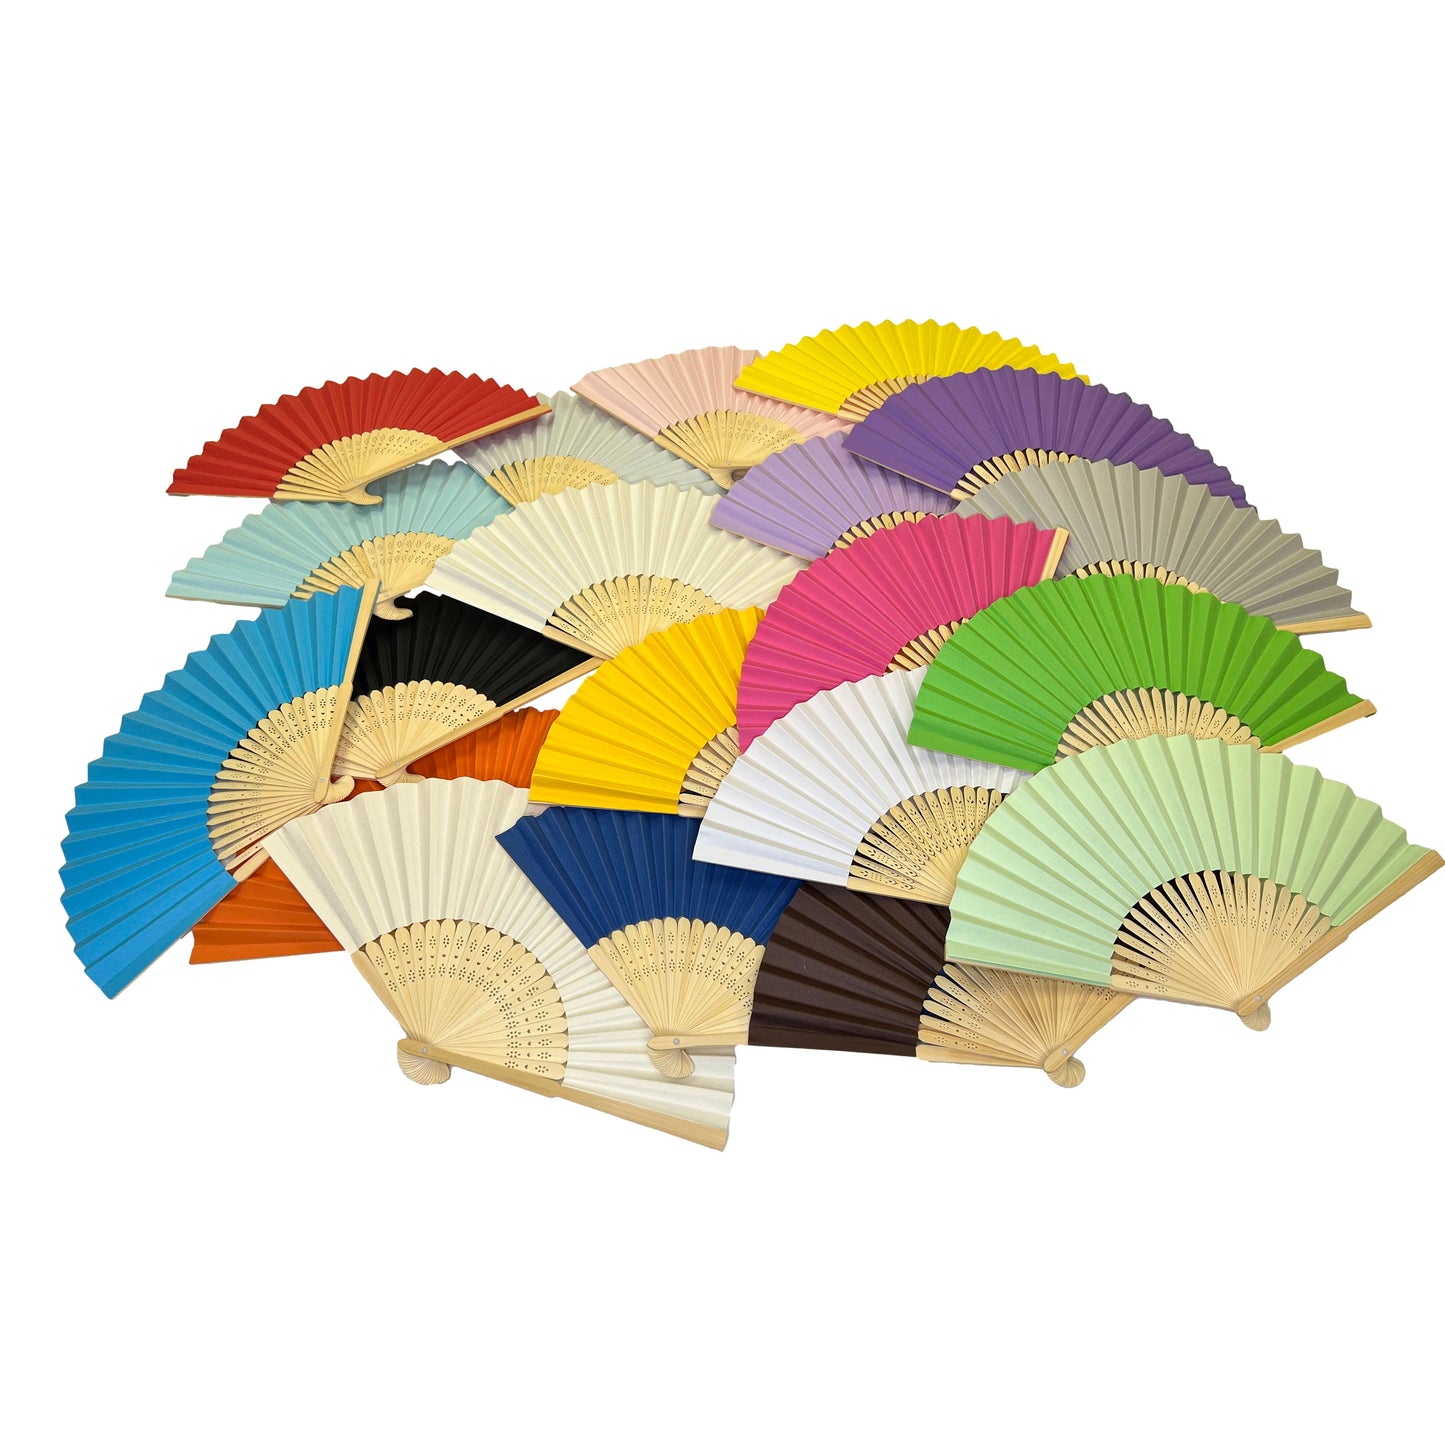 Pack of 500 Navy Blue Paper Foldable Hand Held Bamboo Wooden Fans by Parev